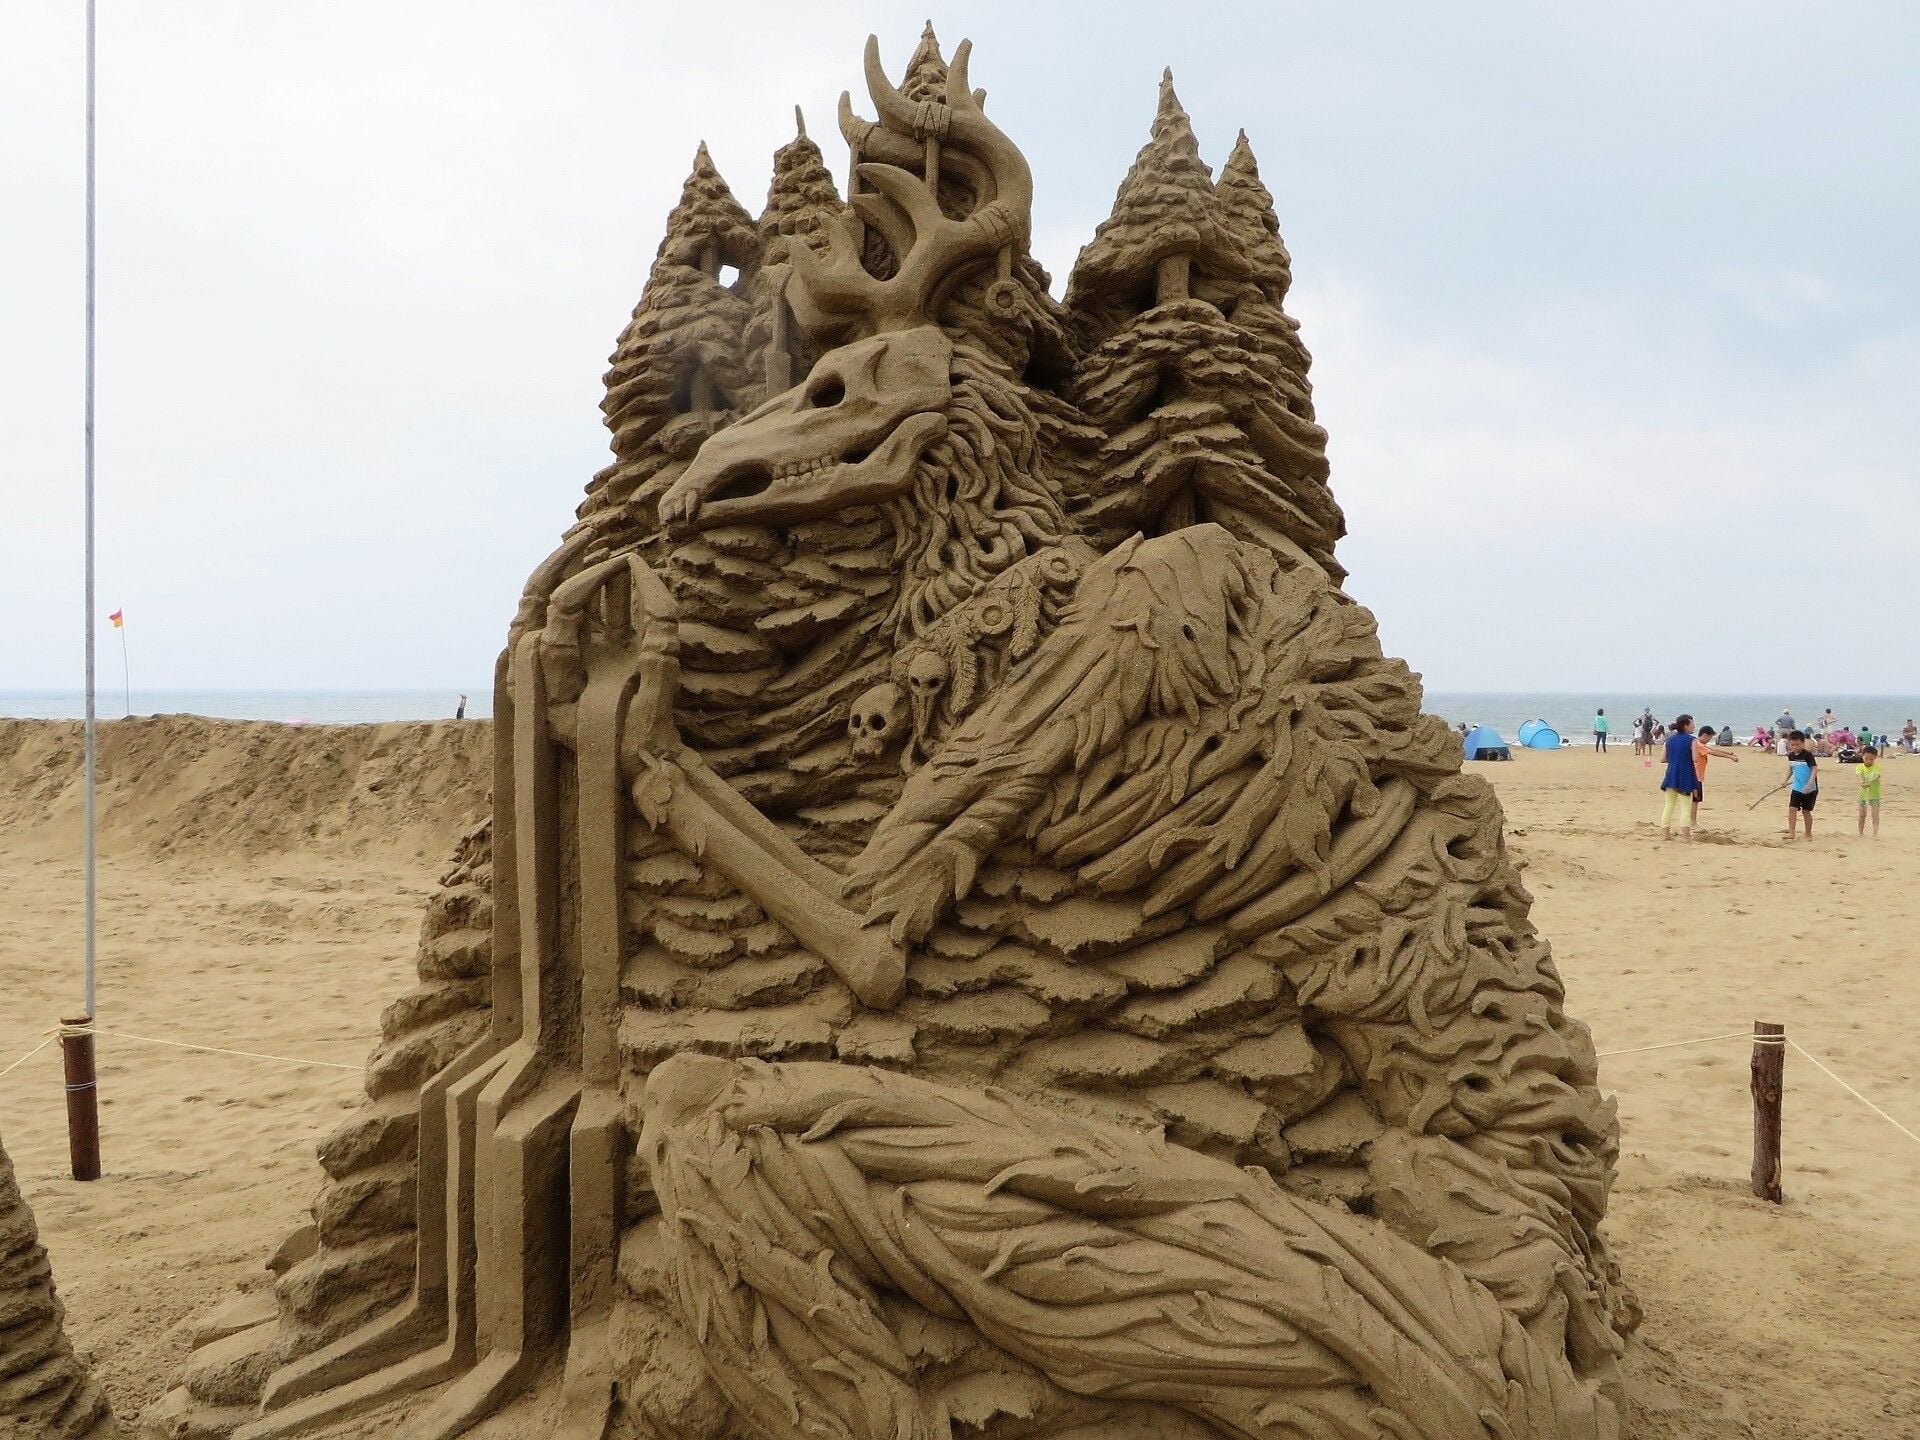 Scary sand creature creation by Guy-Olivier Deveau.